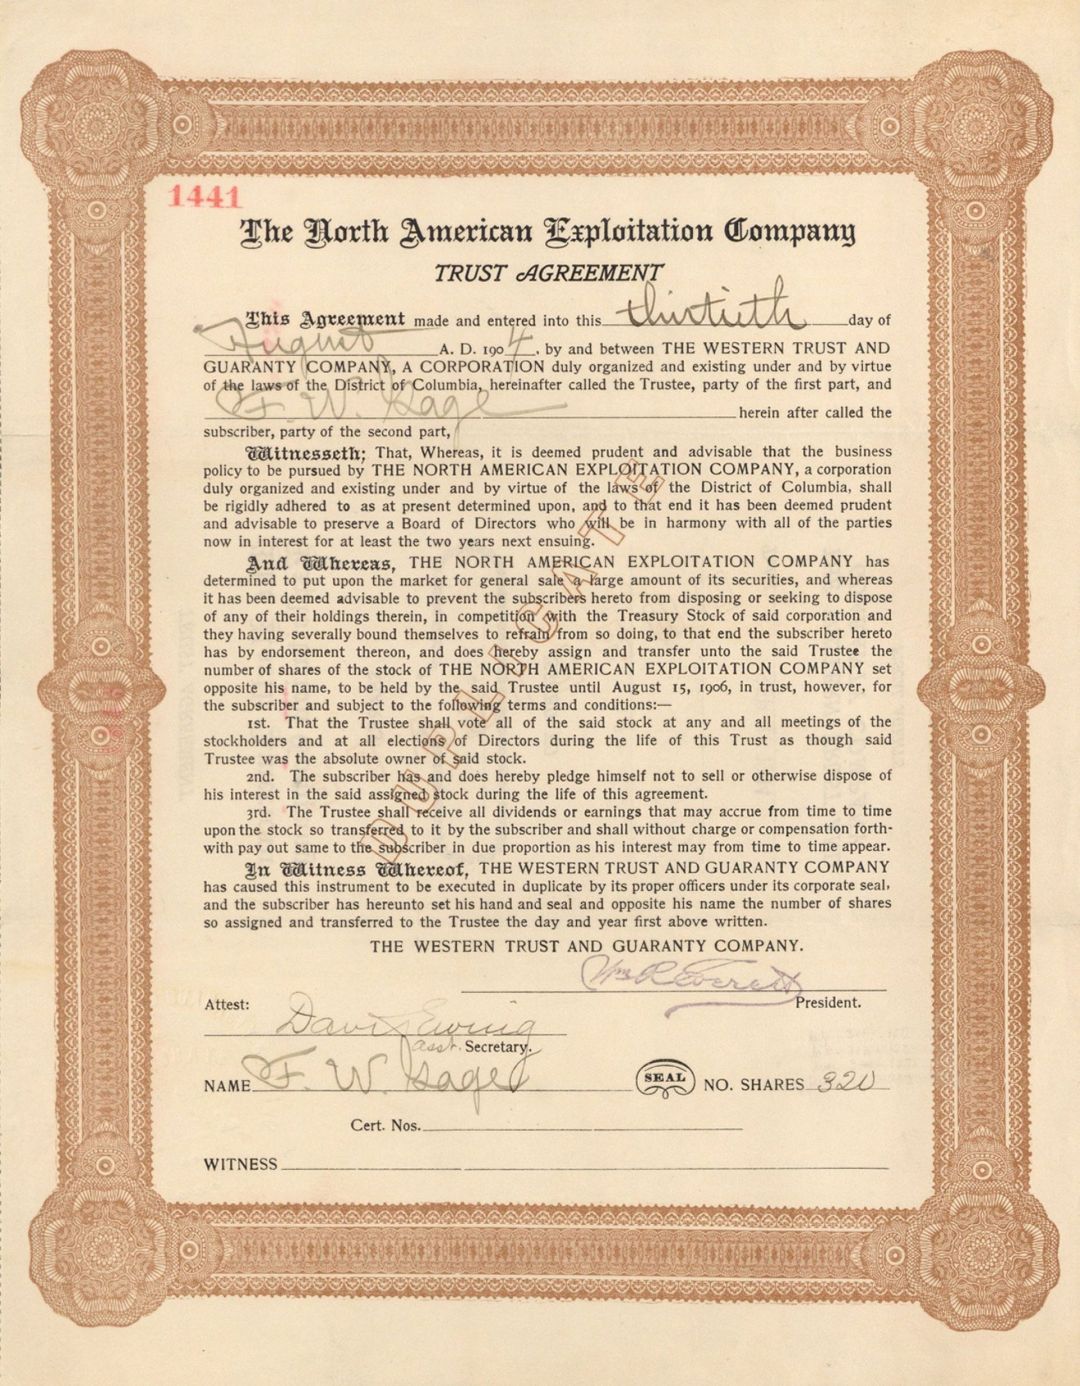 North American Exploitation Co. - 1904 dated Trust Agreement